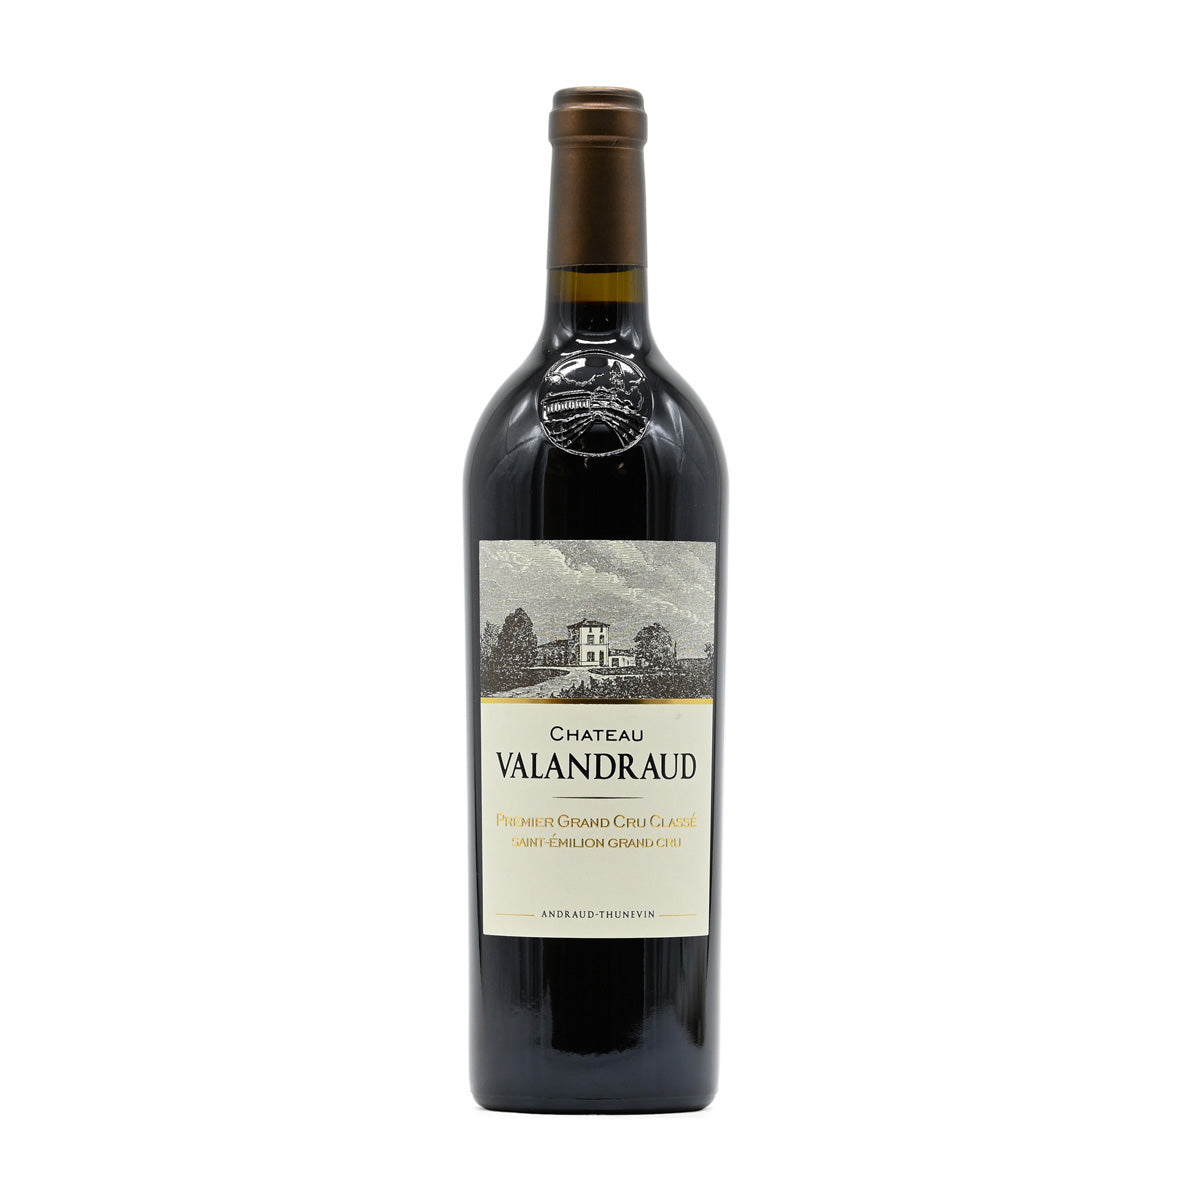 Château Valandraud 2020, 750ml French red wine; made of a blend of Merlot, Cabernet Sauvignon, and Cabernet Franc; from Saint-Emilion Grand Cru, Bordeaux, France – GDV Fine Wines, Hong Kong